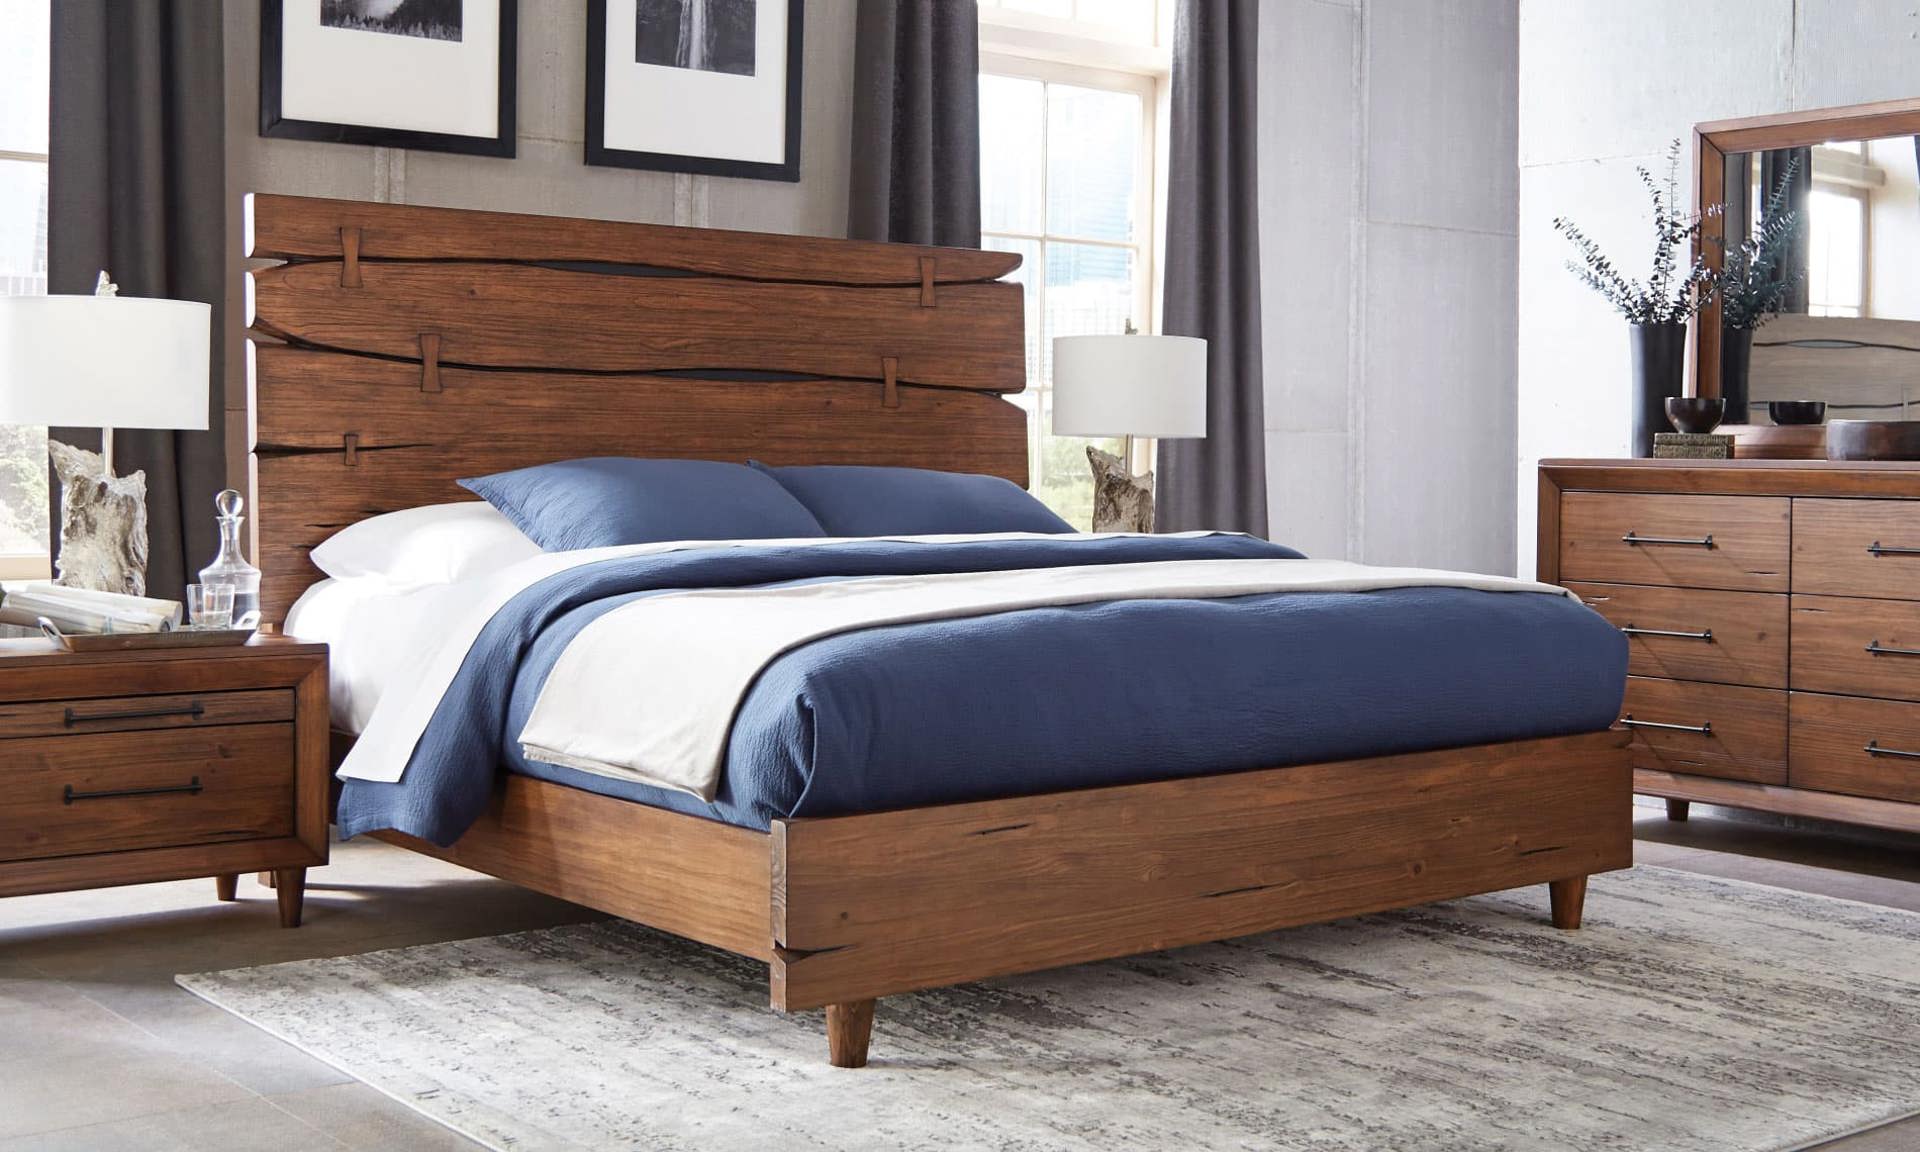 Rotta bedroom set from the Denver Live Edge Collection.